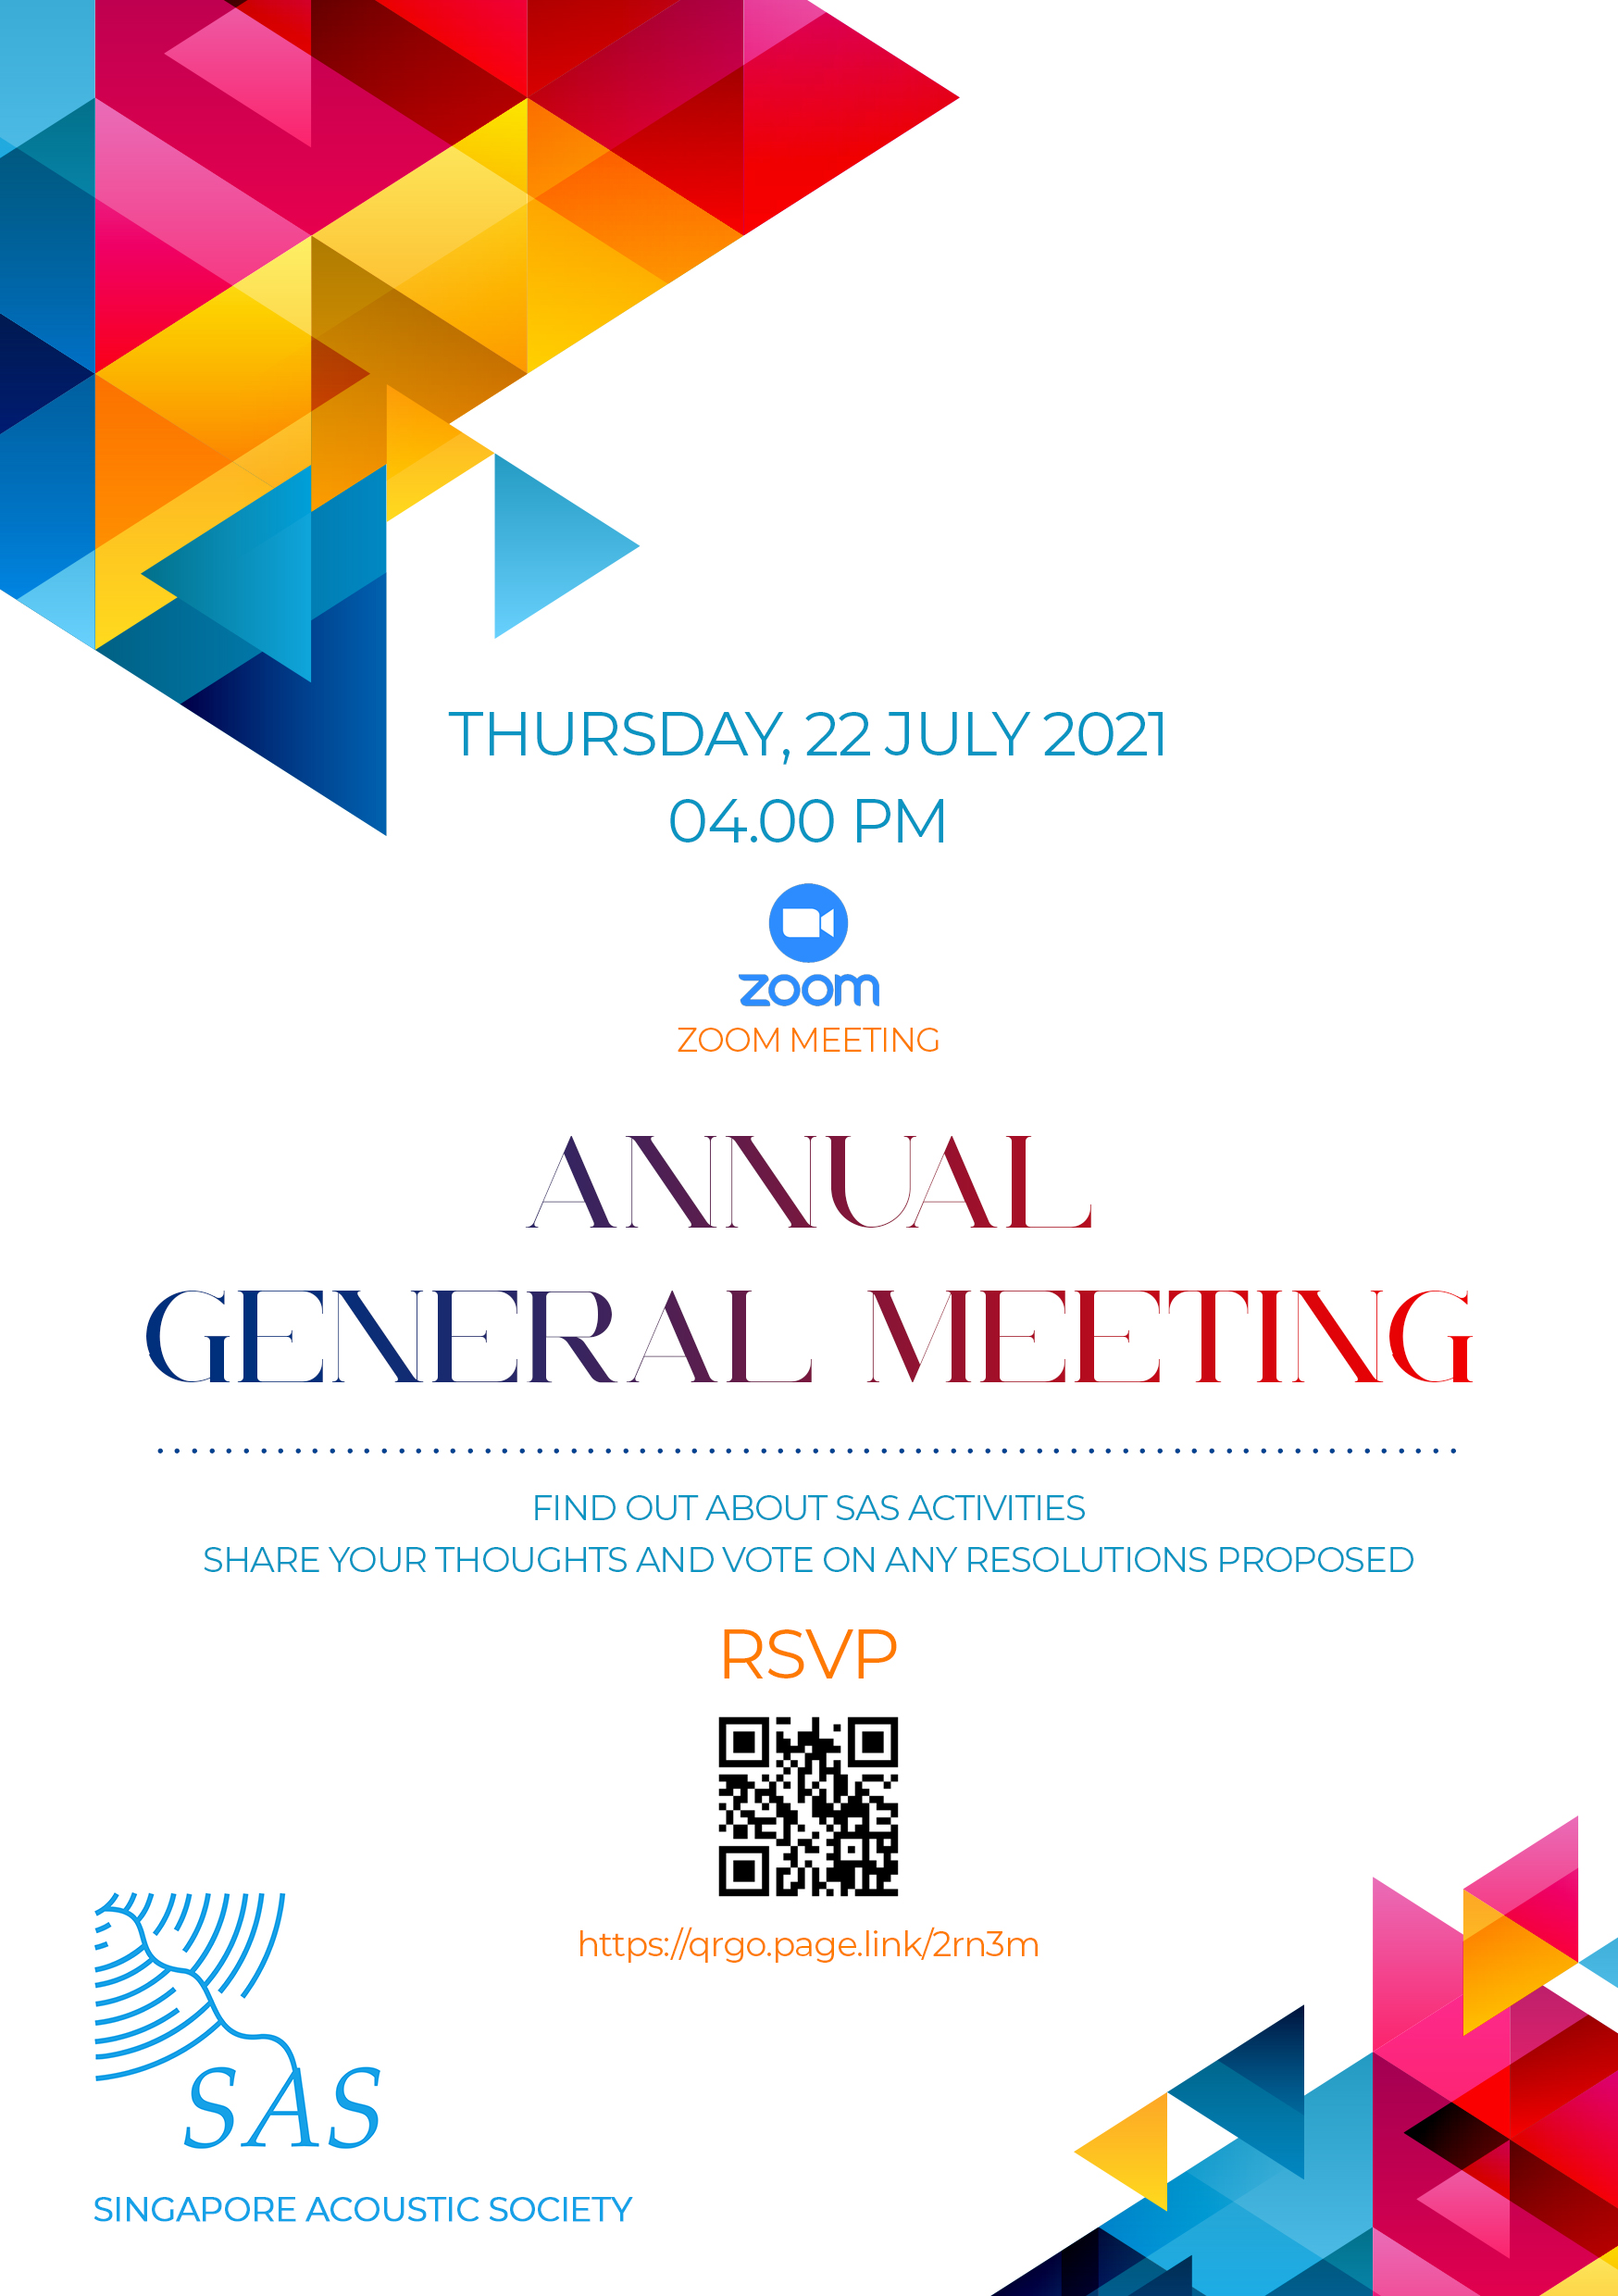 Annual general meeting in Zoom at Thursday, 22 July 2021 04:00pm (GMT+8)